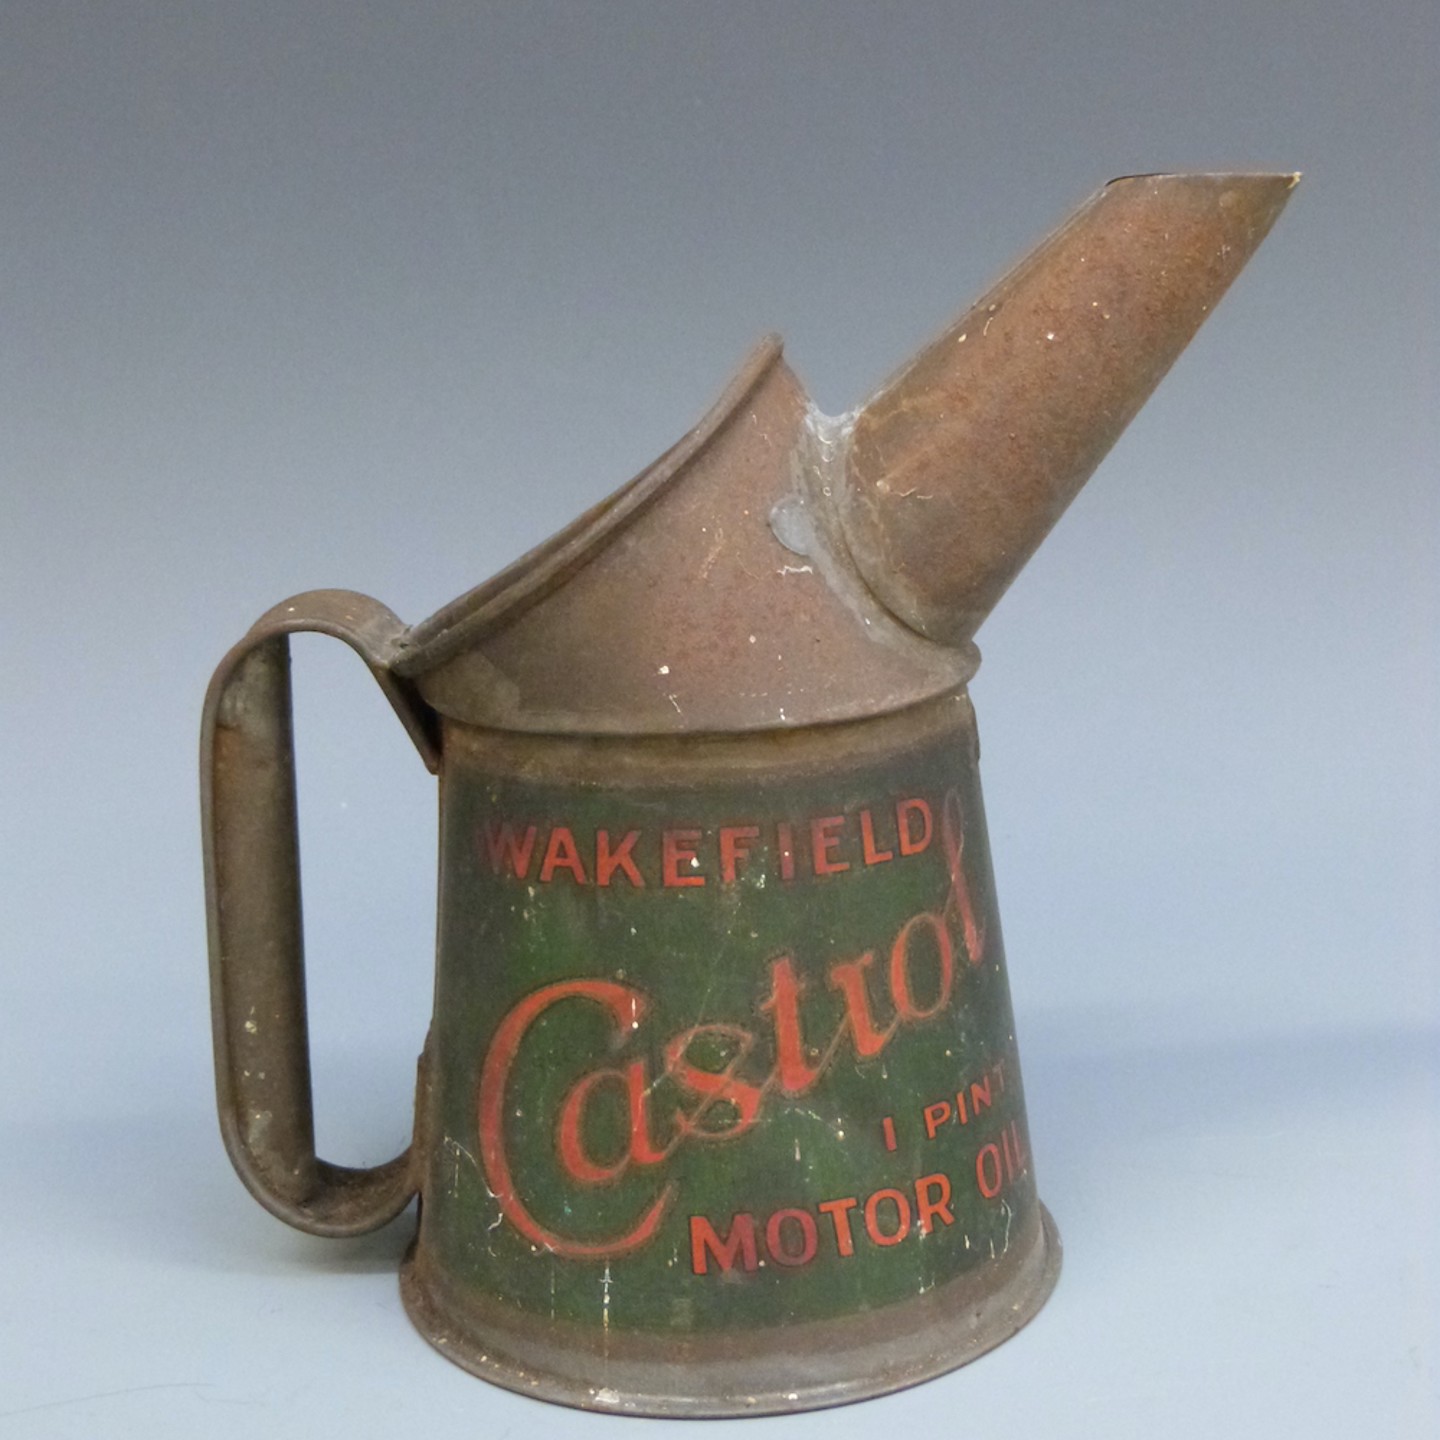 Wakefield Castrol Vintage Oil Can. Sold For £120